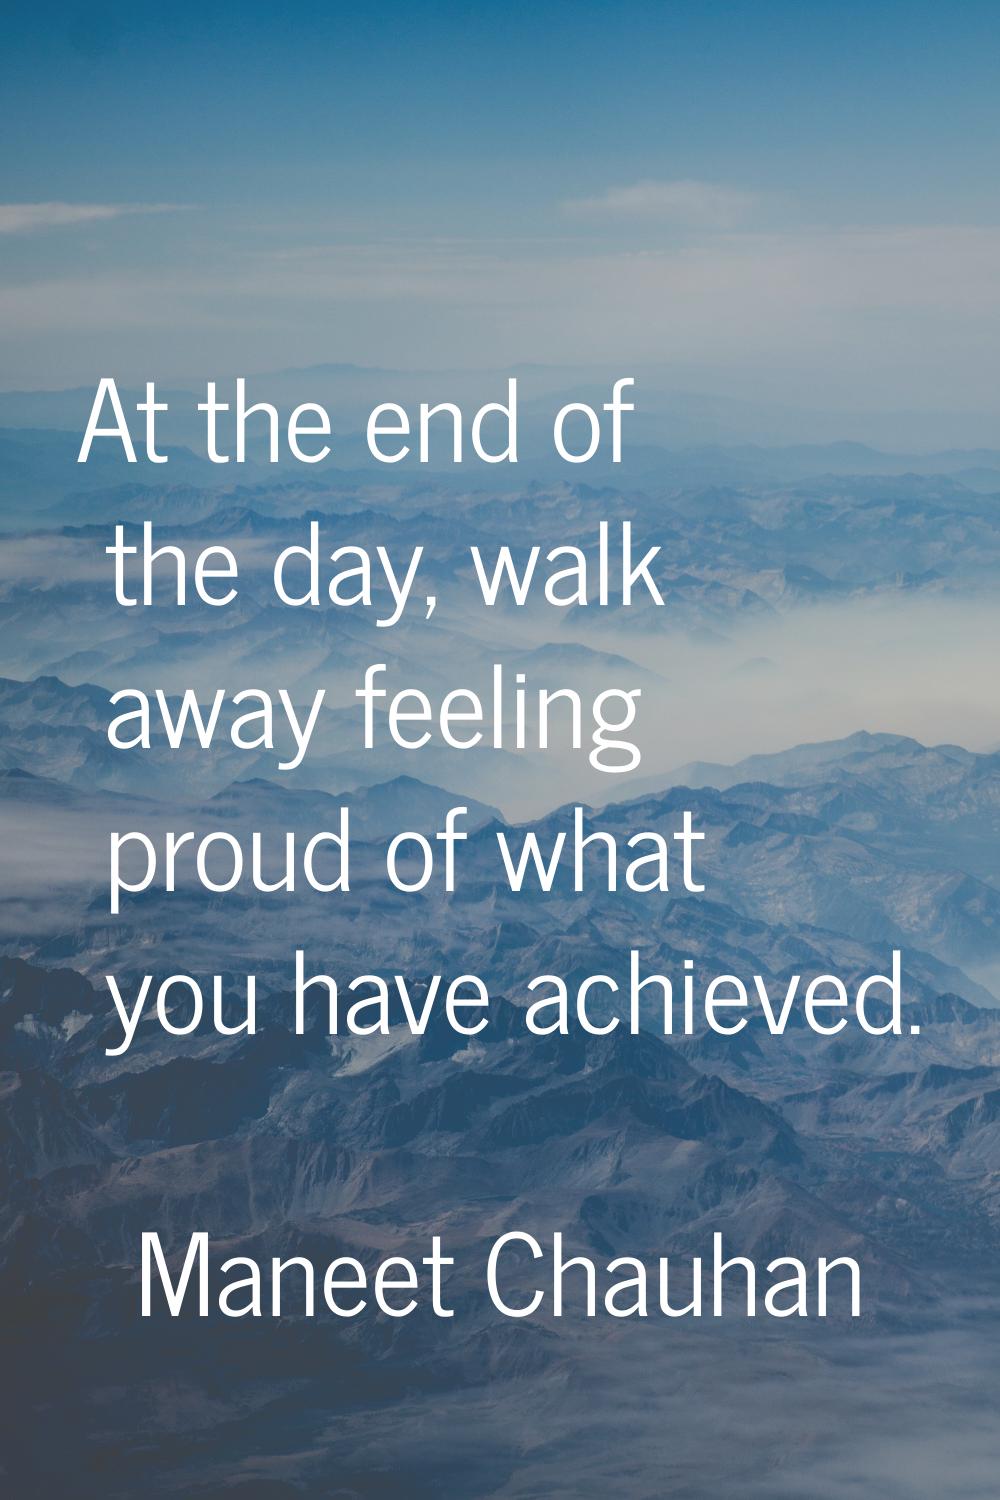 At the end of the day, walk away feeling proud of what you have achieved.